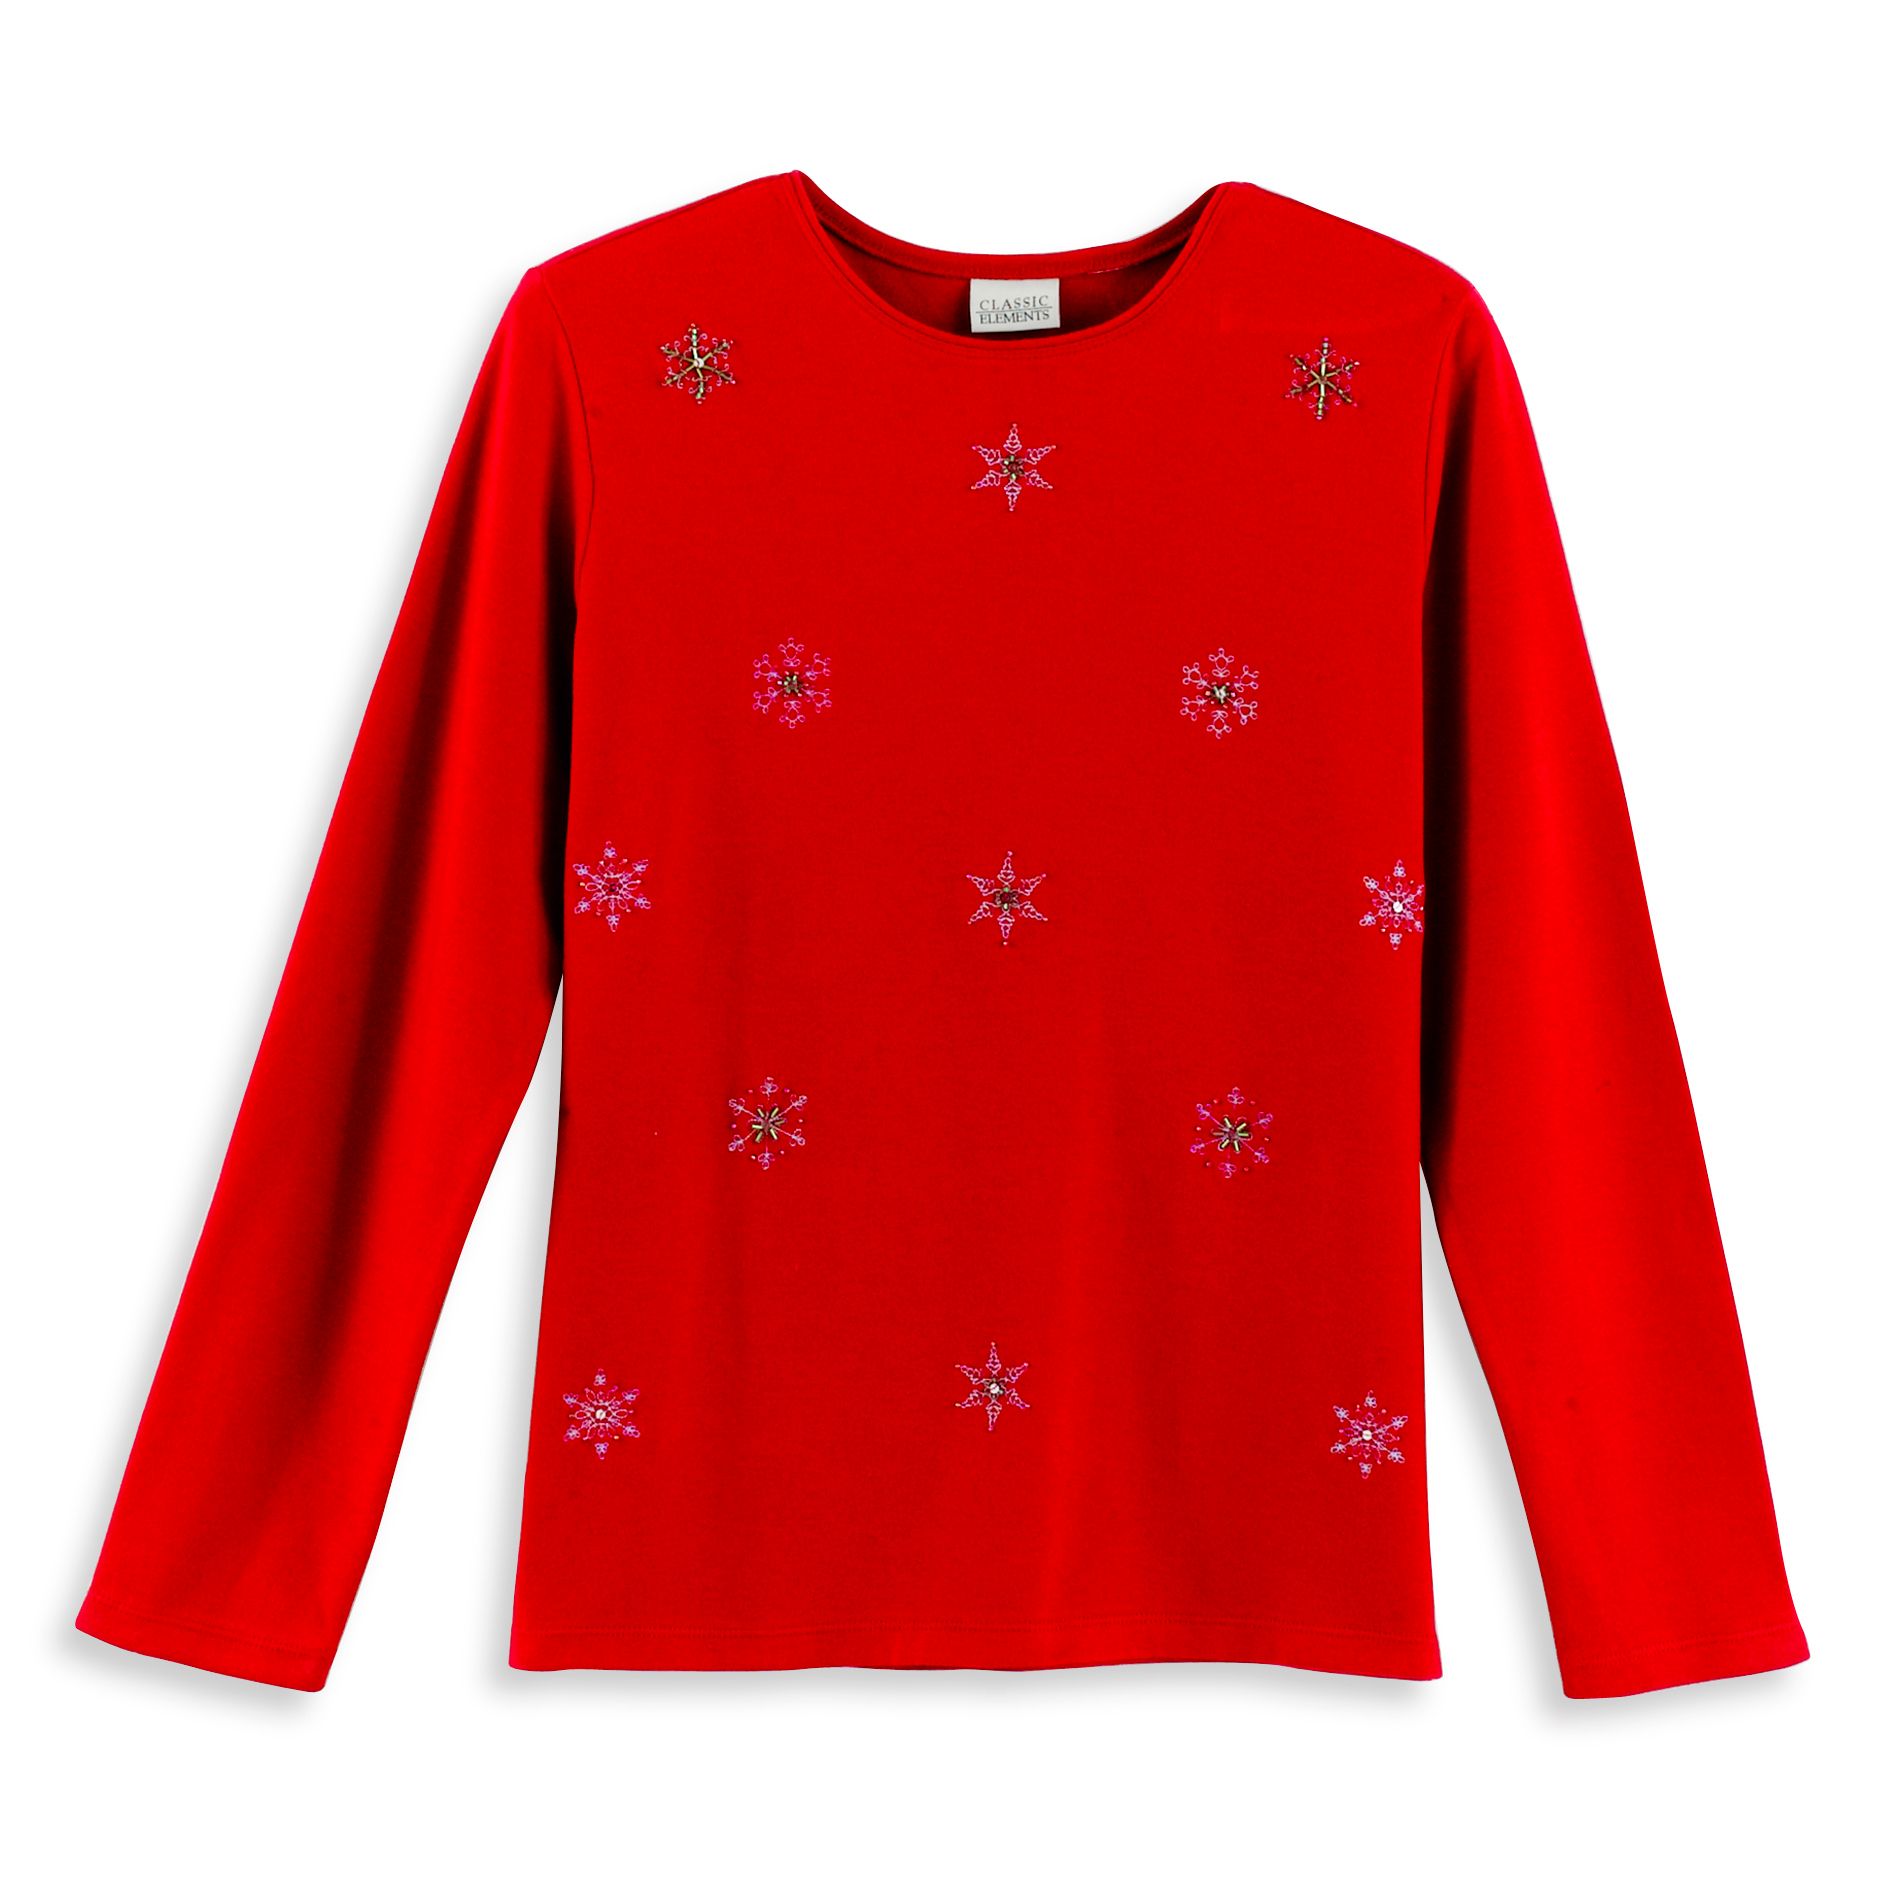 Classic Elements Women's Plus Long Sleeve All-Over Embroidery Christmas Tee